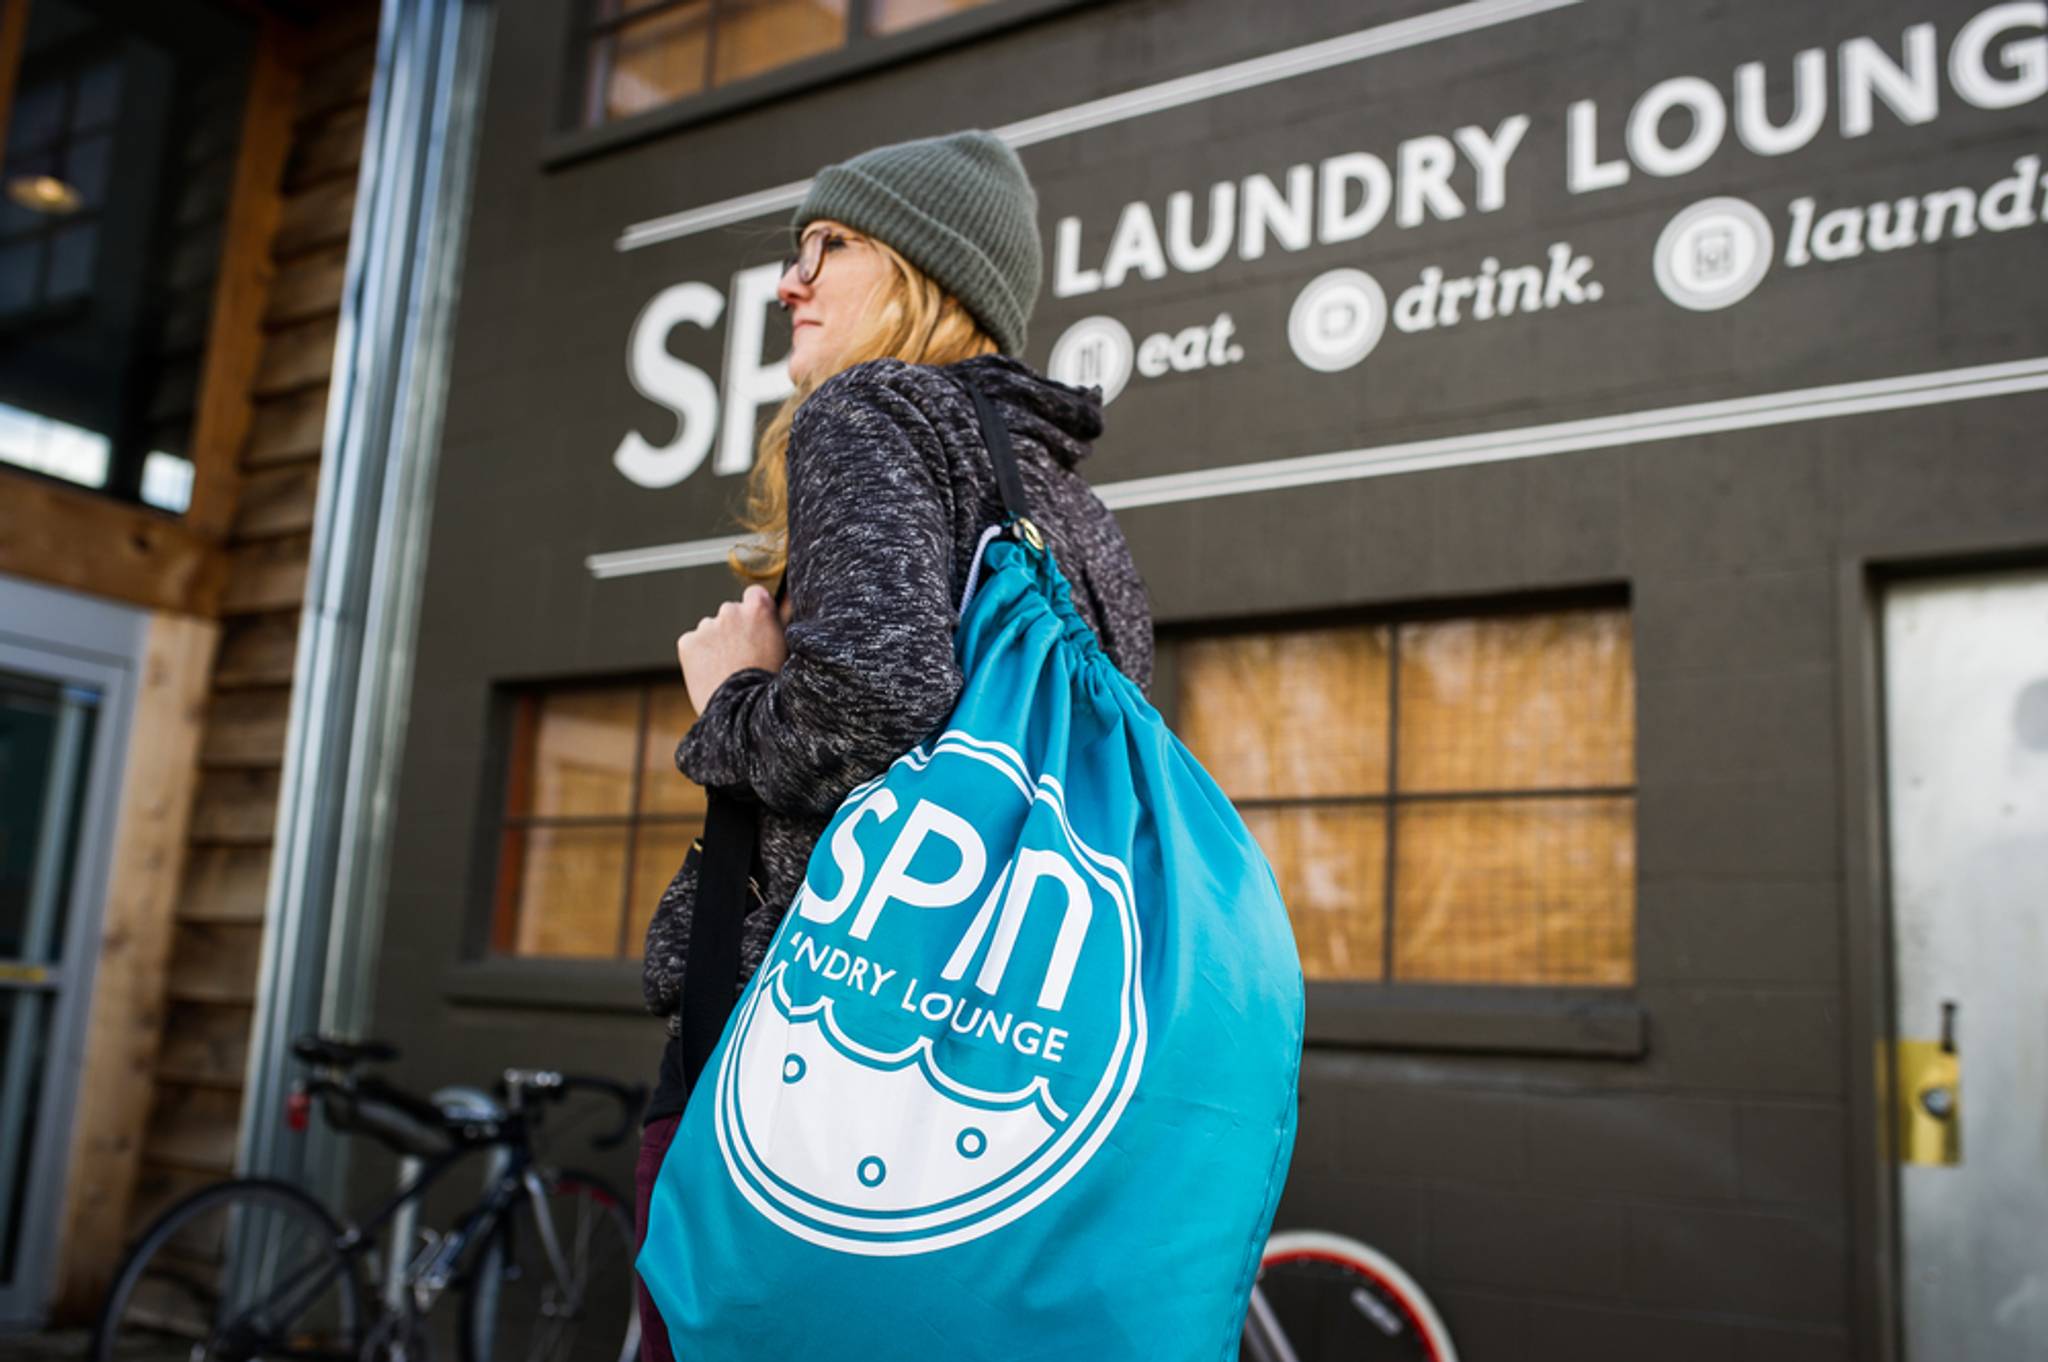 Spin Laundry Lounge: a clean take on the laundromat